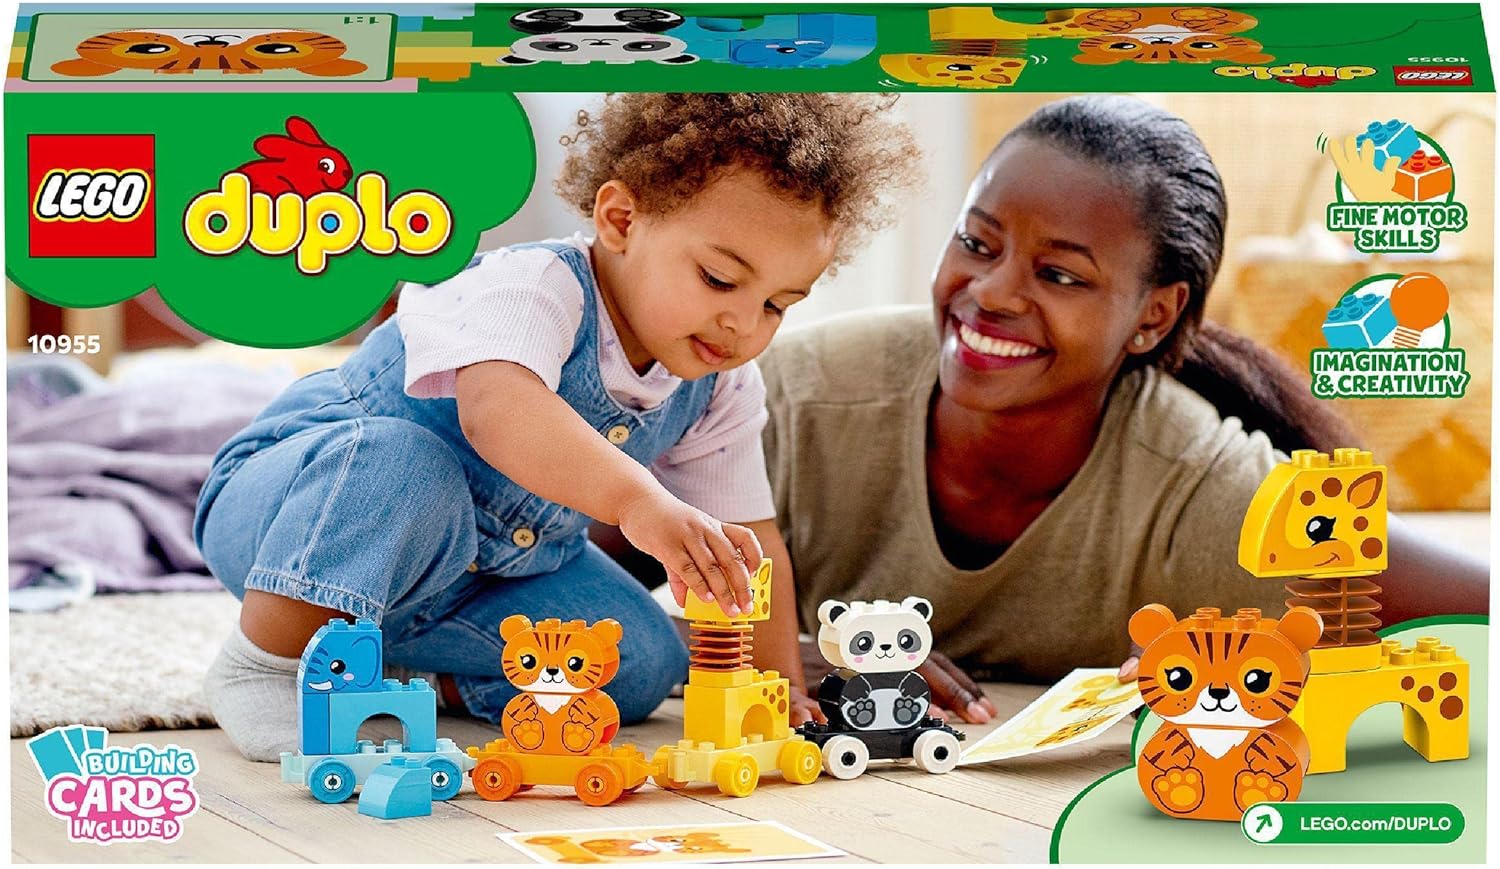 LEGO 10955 Duplo My First Animal Train with Toy Animals, Railway, Educational Toy for Toddlers from 18 Months, My First Building Blocks